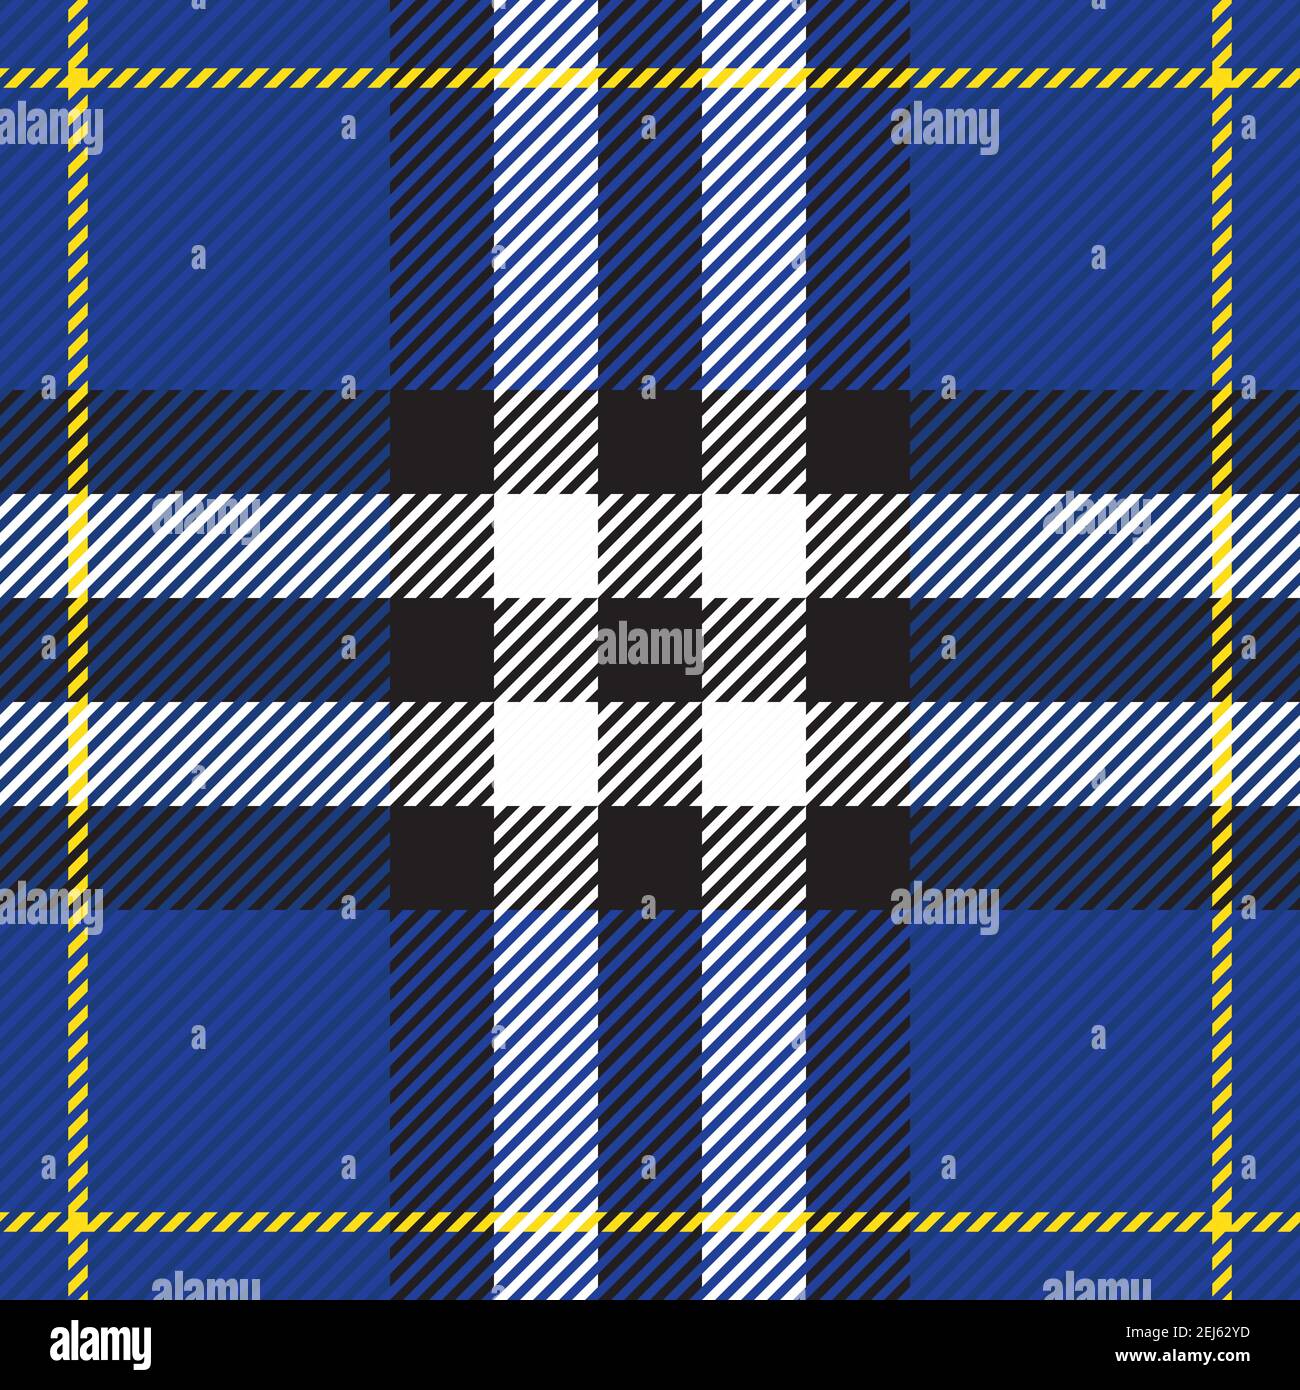 Classic tartan texture seamless pattern. Traditional Scottish checkered plaid ornament. Coloured geometric intersecting striped vector illustration. S Stock Vector